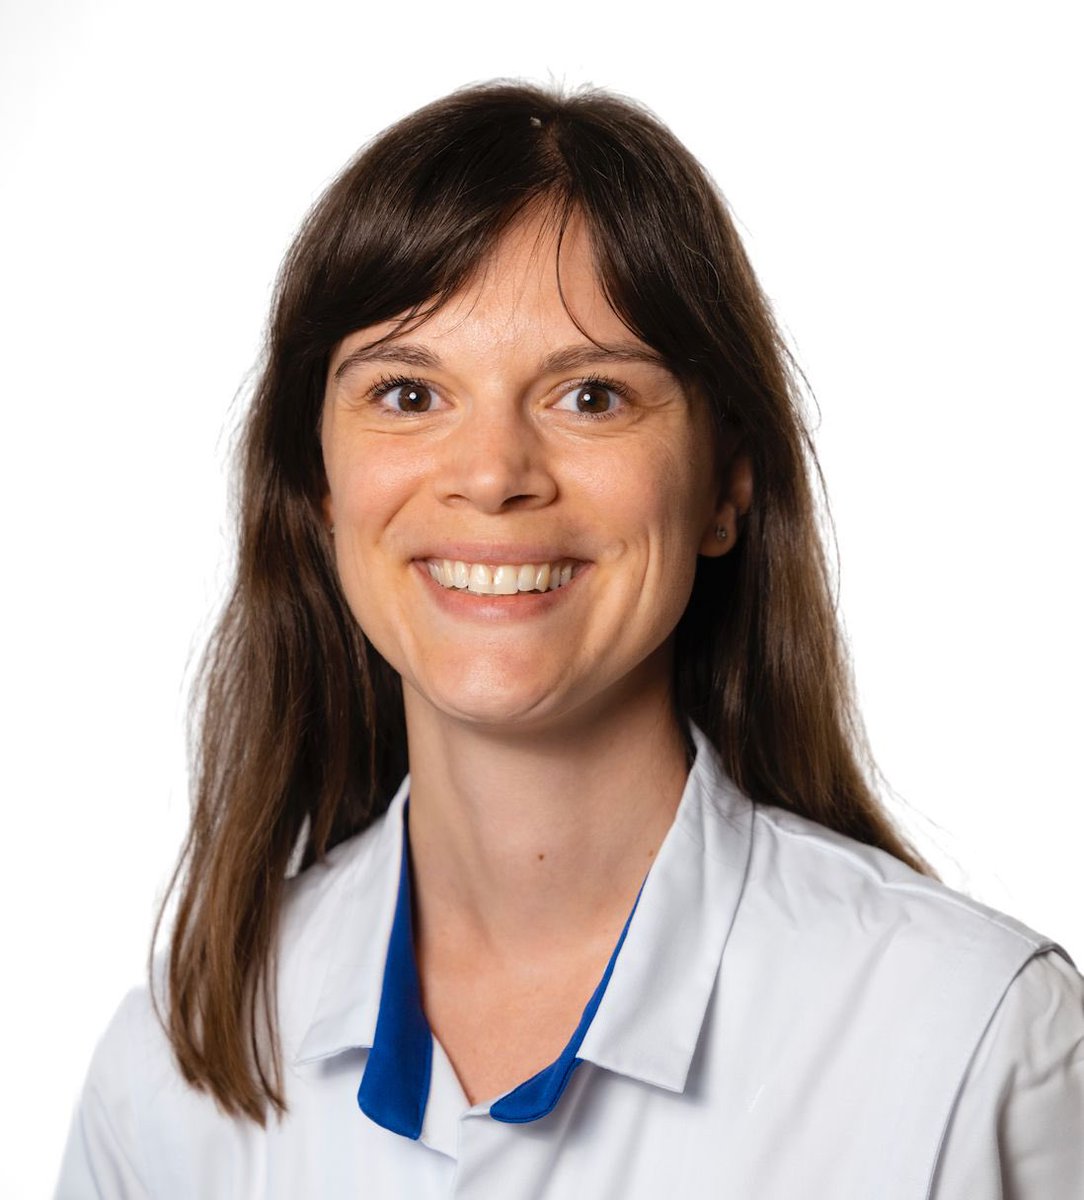 Congratulations to @RaevensSarah to be elected as the new junior lead at @ERN_RARE_LIVER for @ValdigGroup ! She follows @MPraktiknjo as he is now elected to join @ValdigGroup steering committee.